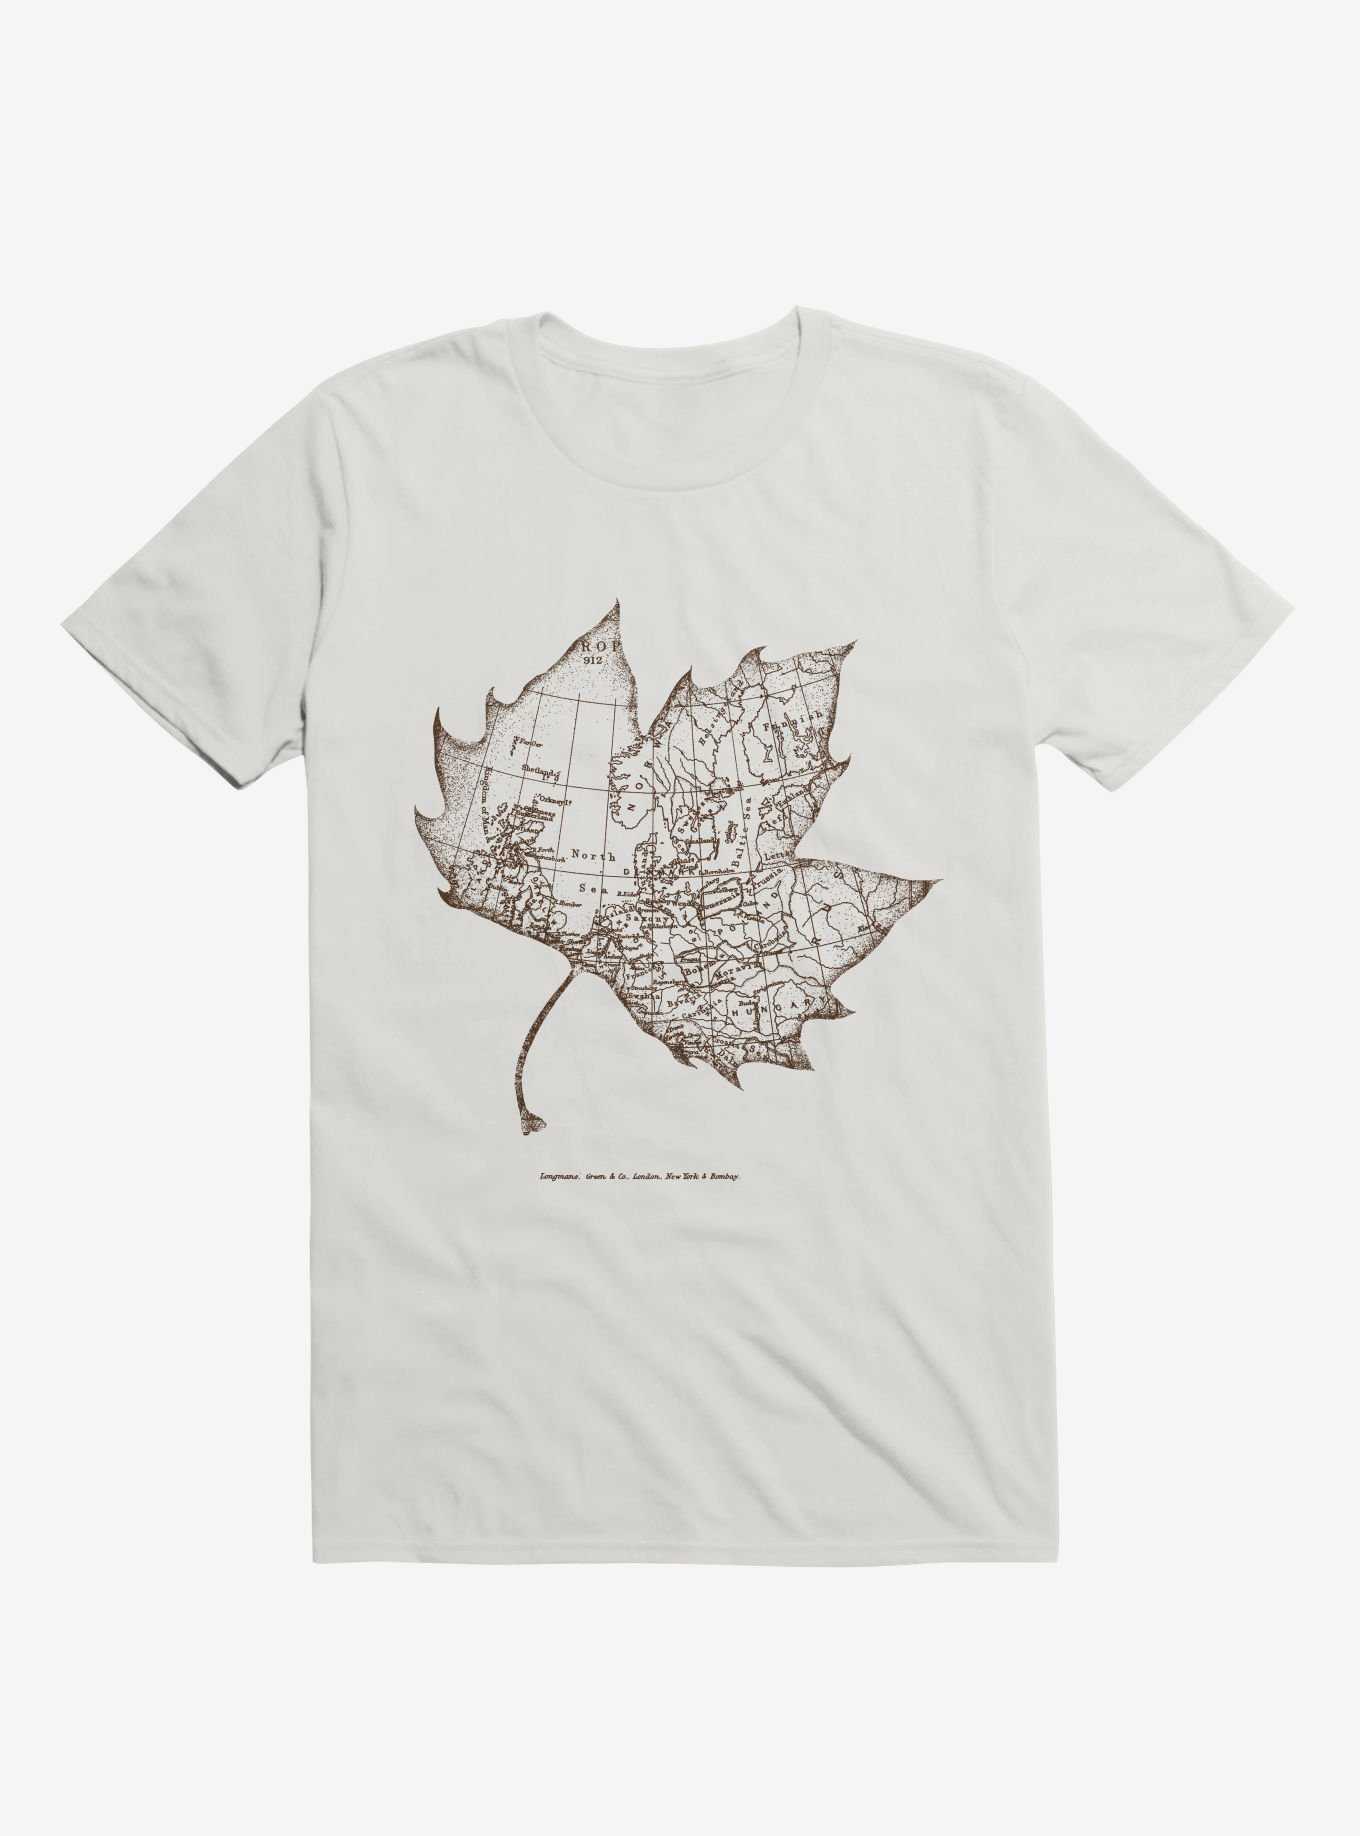 Travel With The Wind T-Shirt, , hi-res